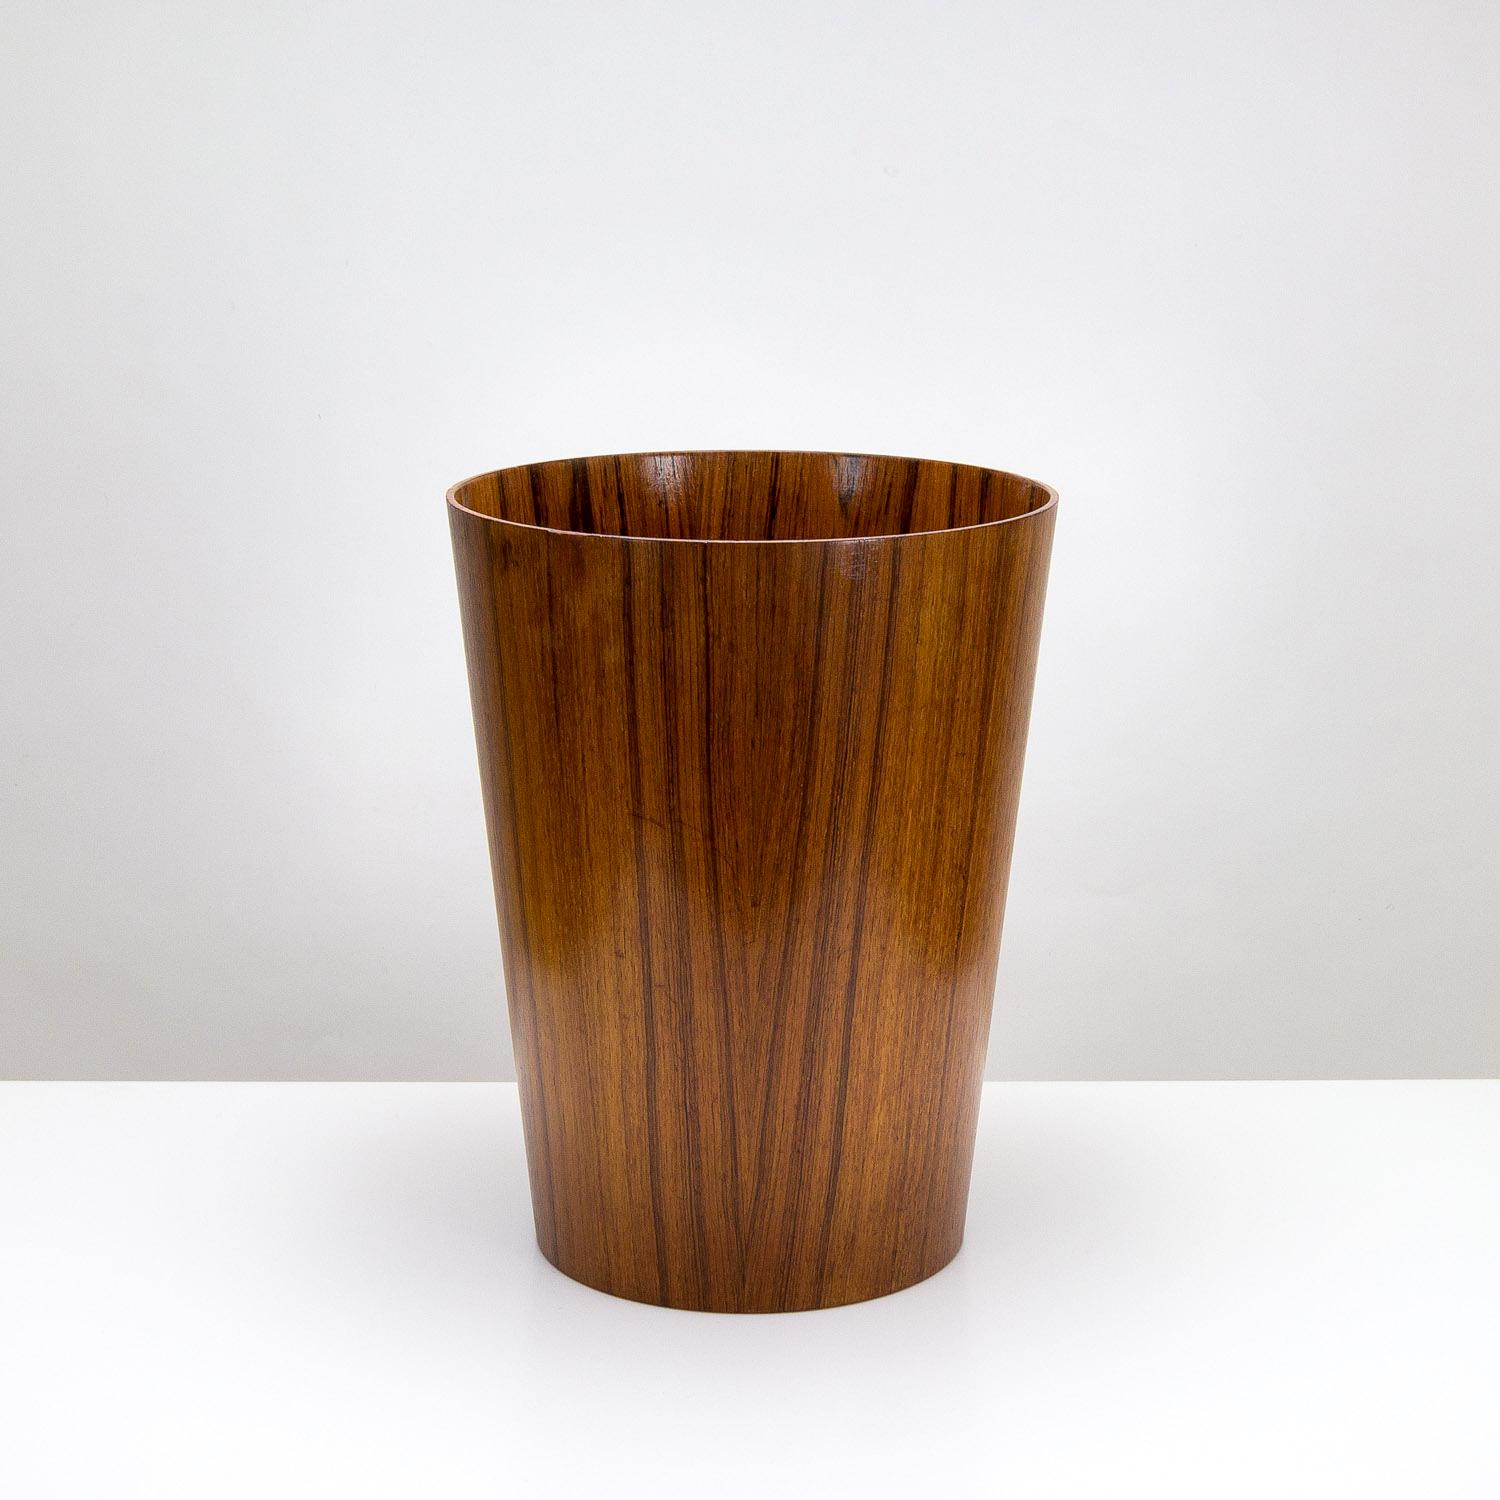 A Model 77703 rosewood waste paper basket with beautiful grain. By Martin Åberg for Servex, Sweden, 1960s. Repolished in our workshop.A Model 77703 rosewood waste paper basket with beautiful grain. By Martin Åberg for Servex, Sweden, 1960s.